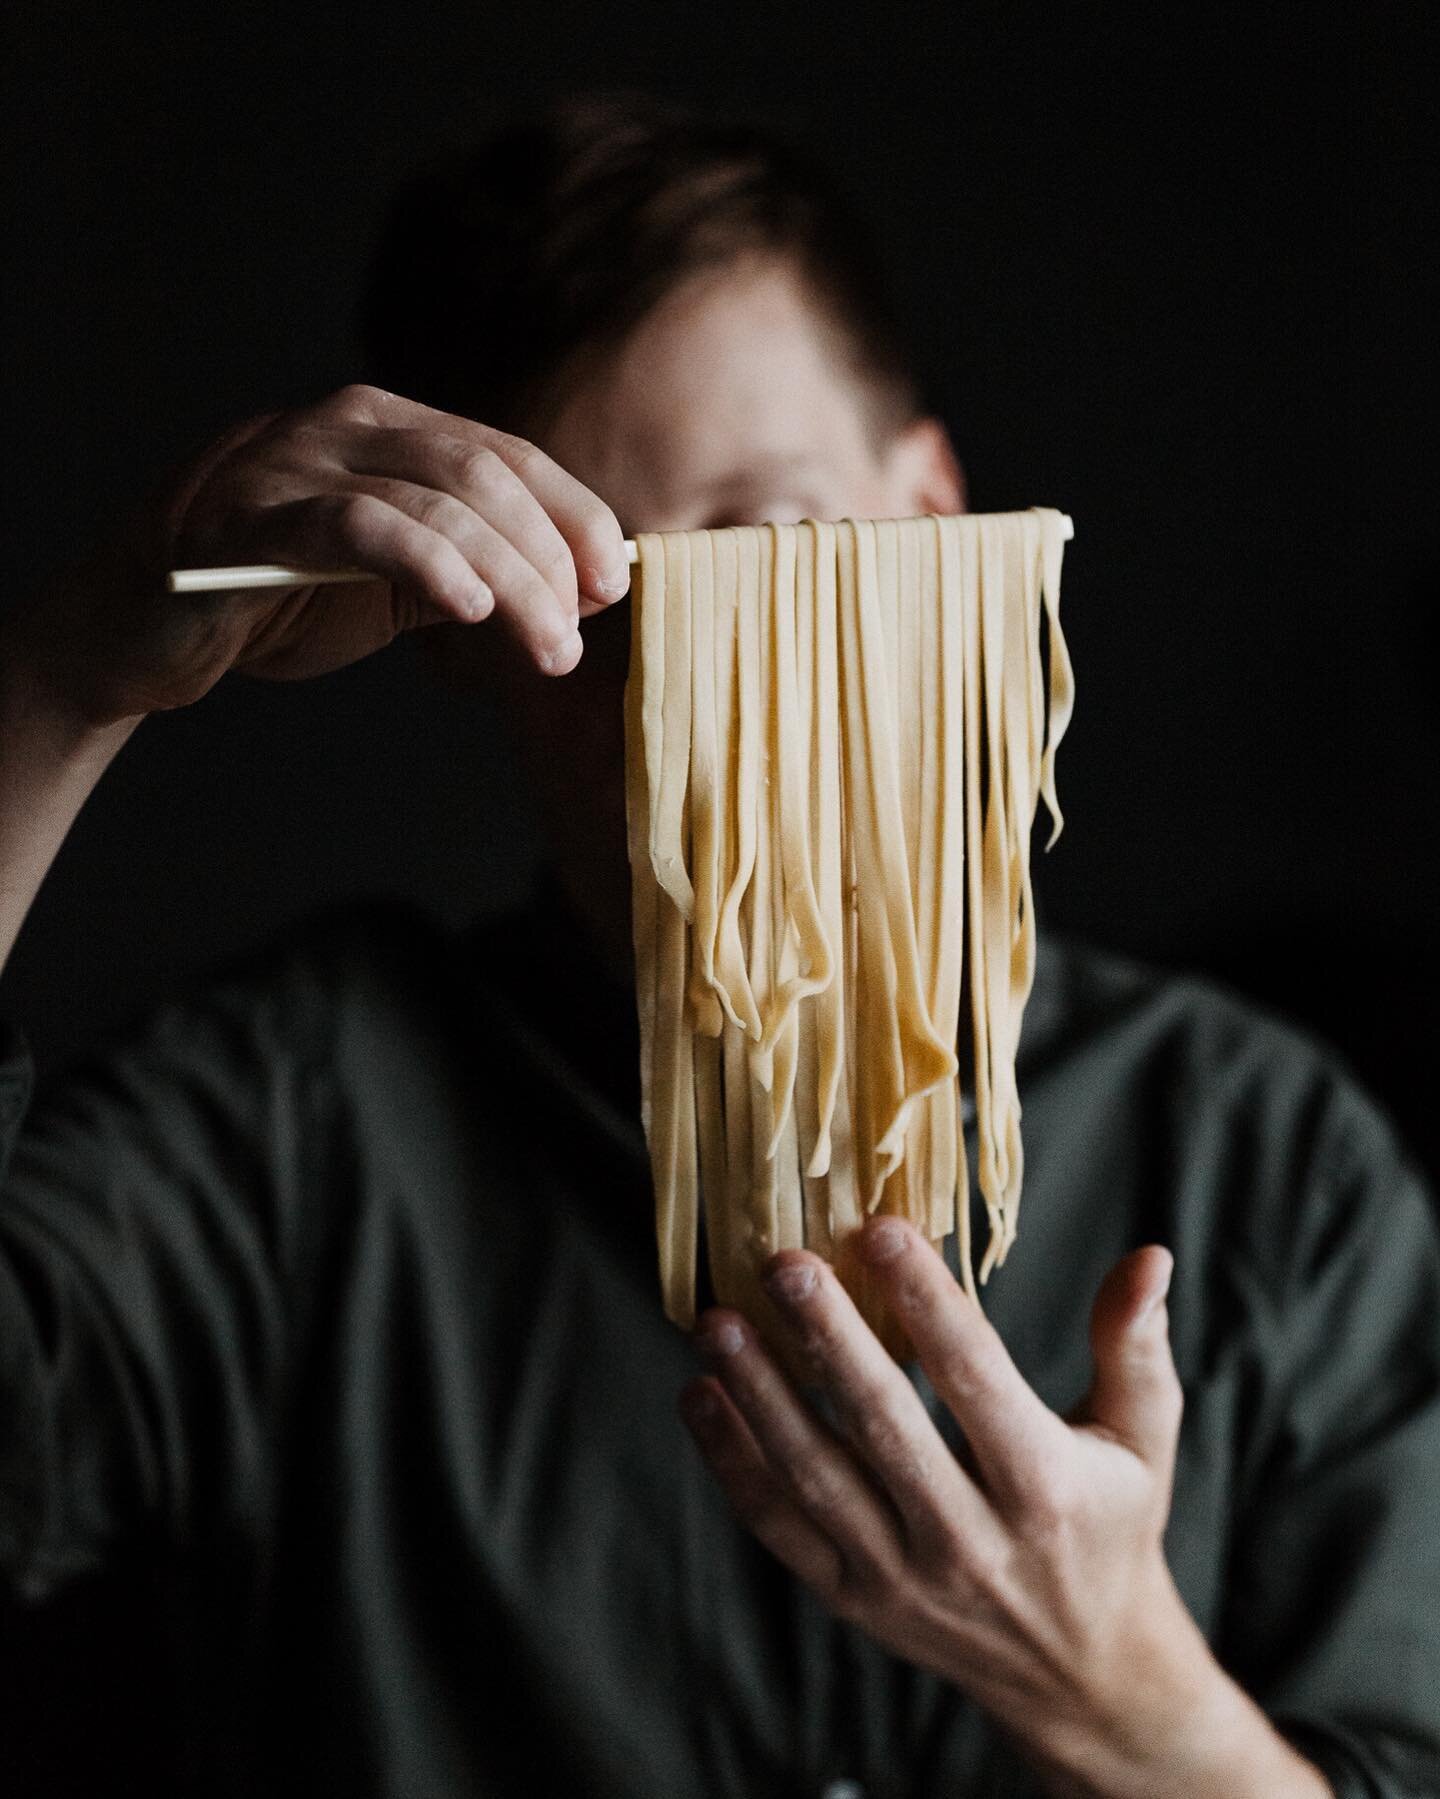 Ready for another 2020 weekend? Personally, most of them have been spent in lockdown this year. With a restriction on hours and distance outside, I&rsquo;ve used them to learn some new skills - pasta being one of them! 

Homemade egg pasta is really 